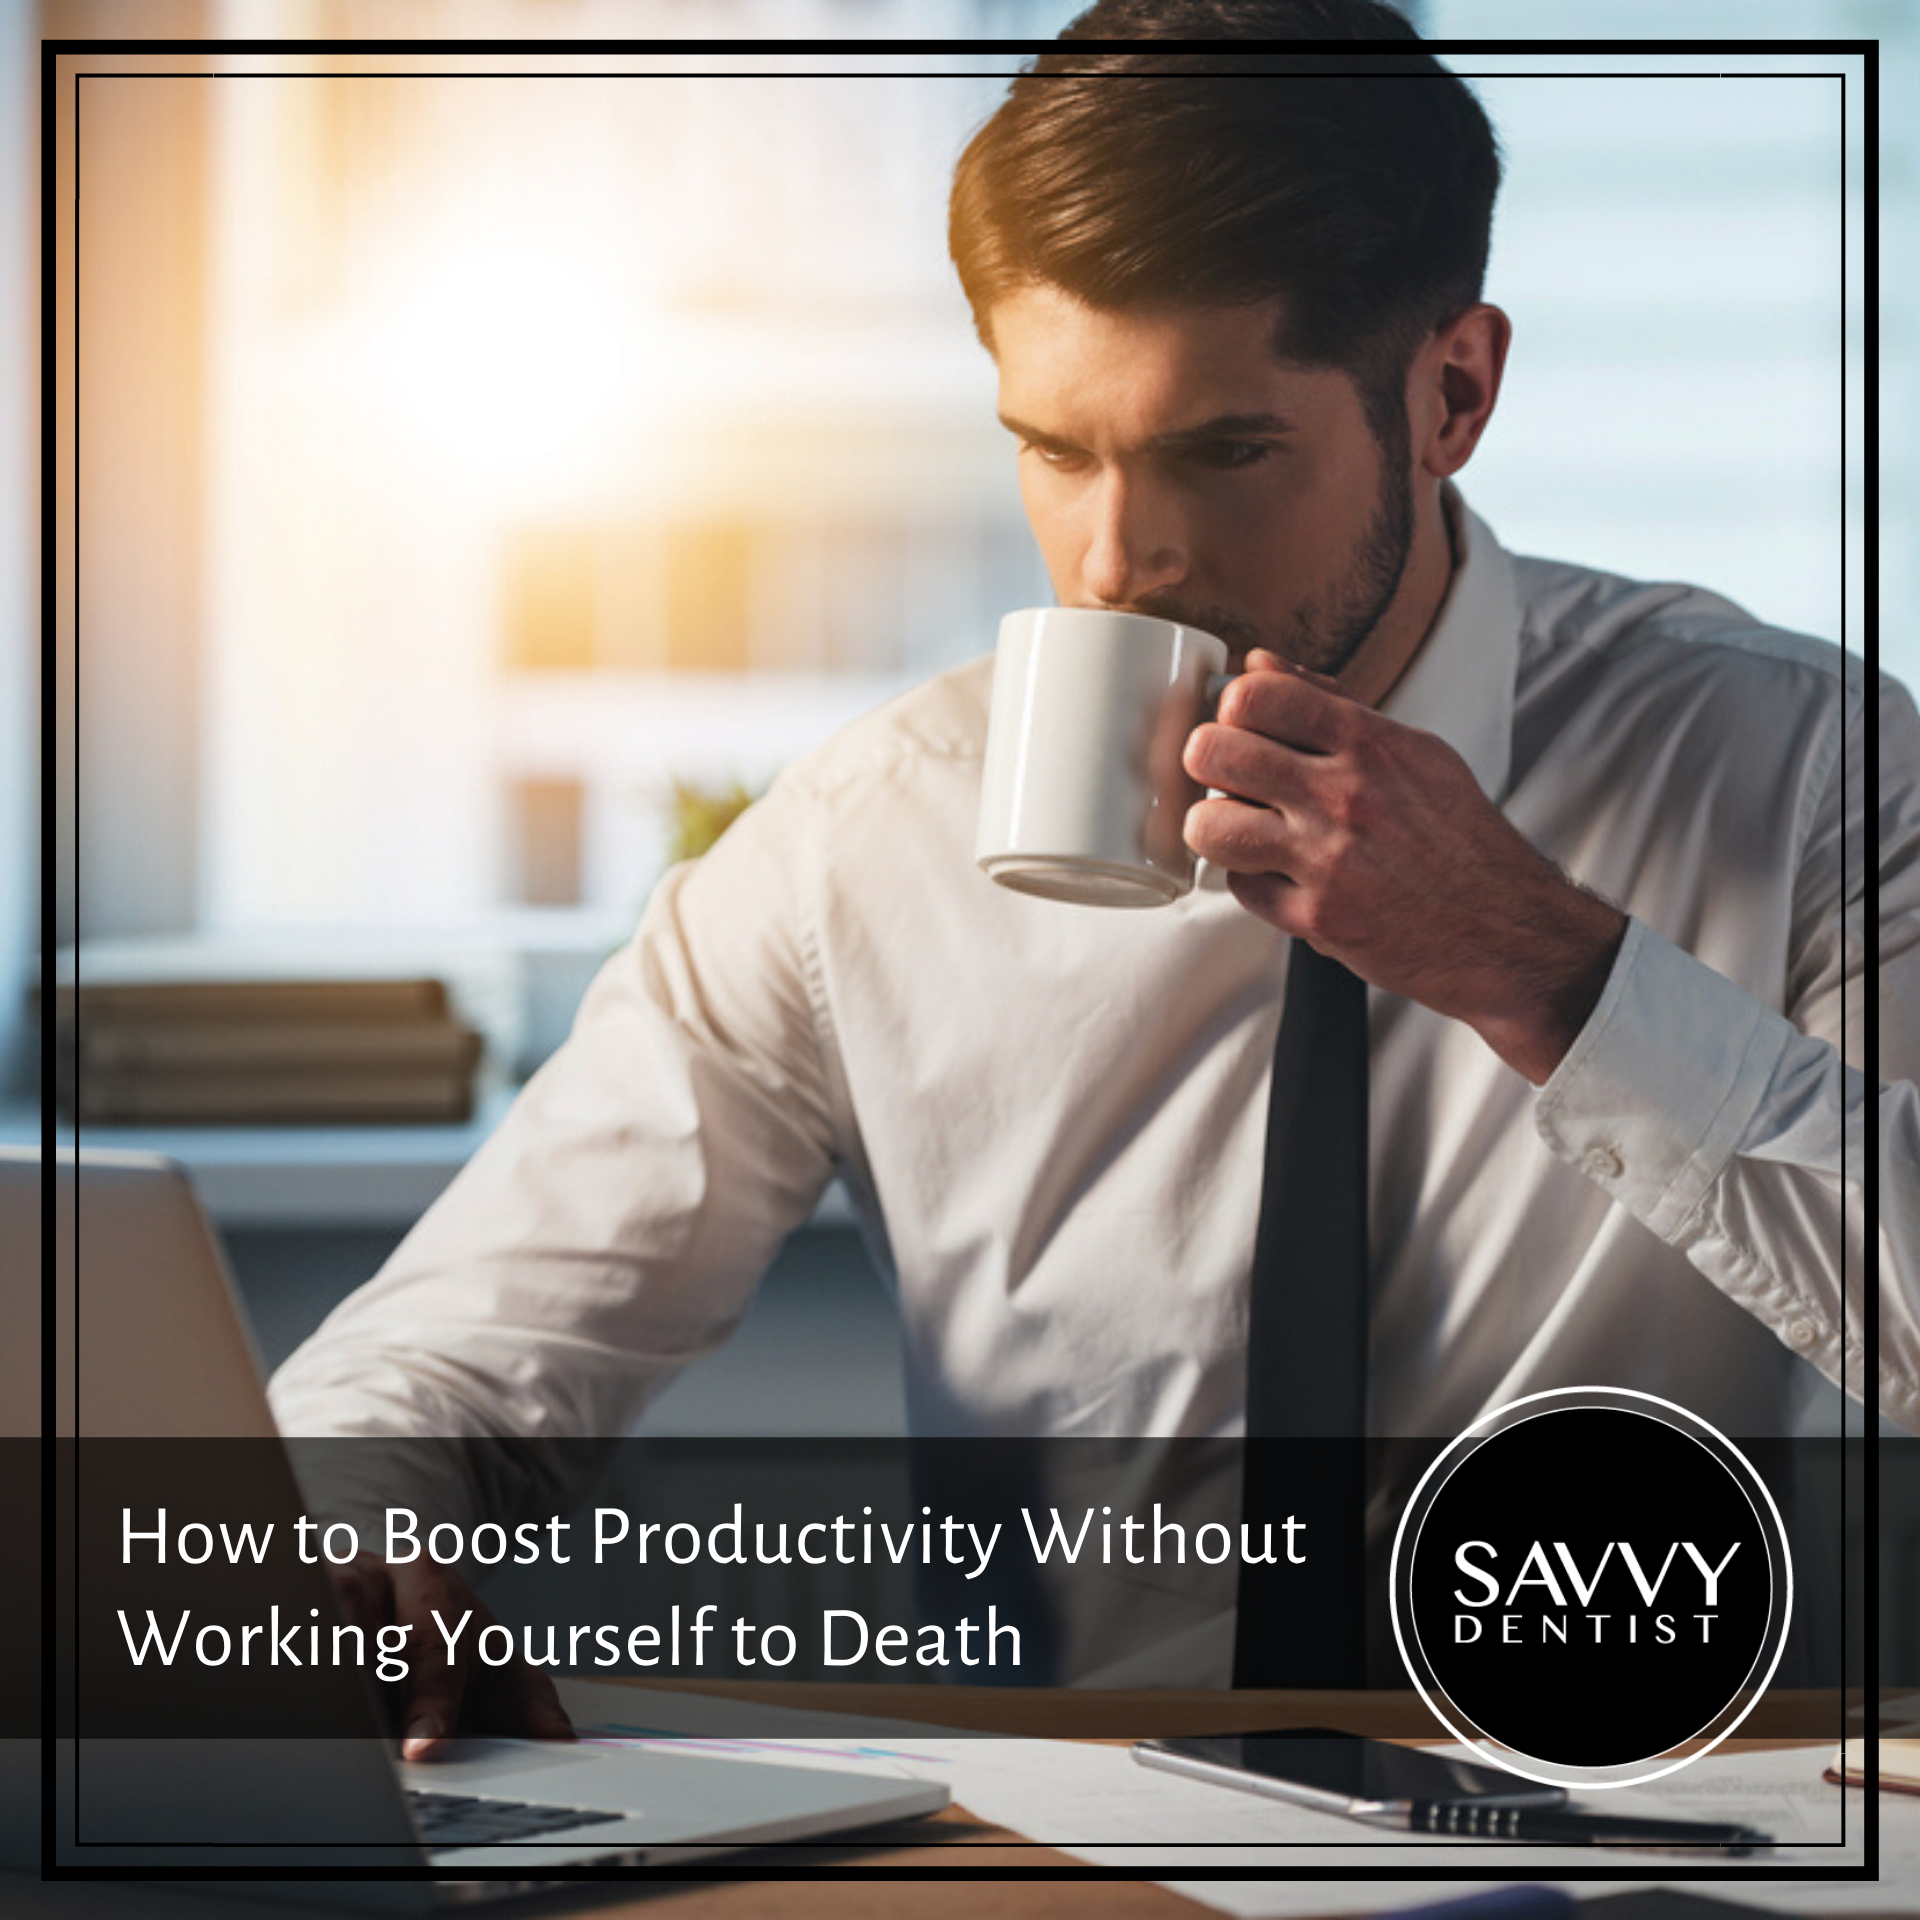 How to Boost Productivity Without Working Yourself to Death